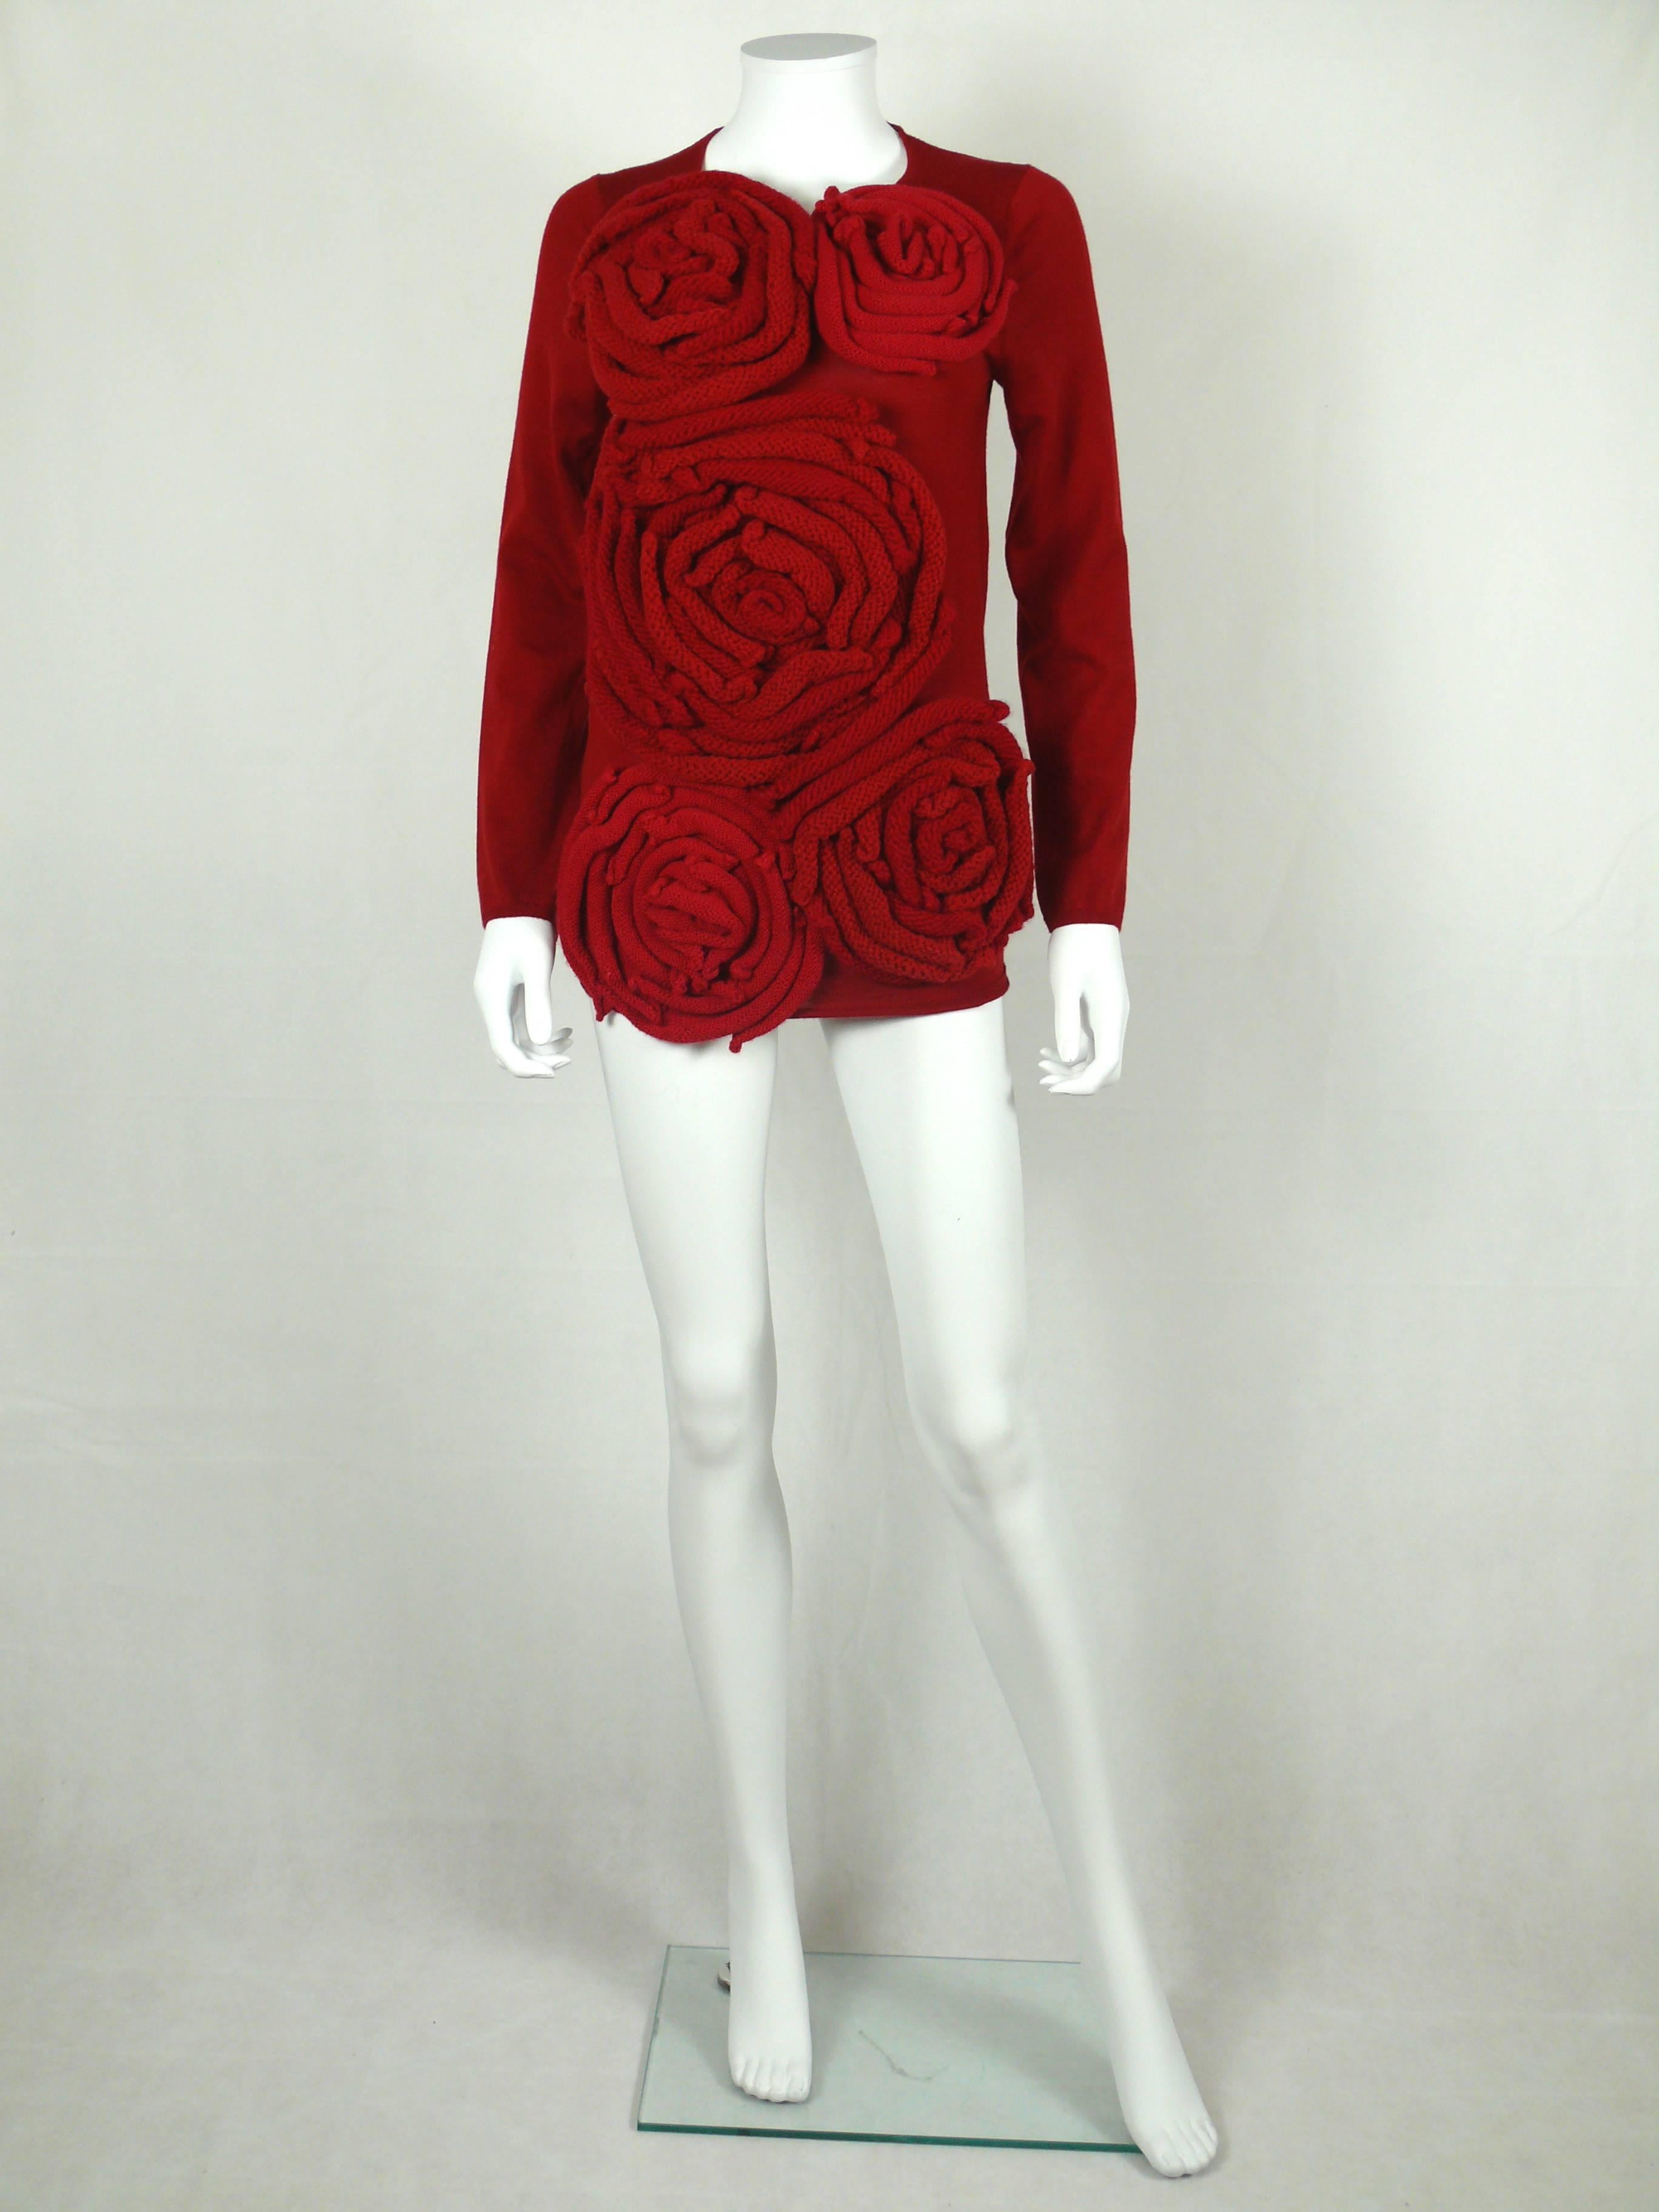 COMME DES GARCONS stunning red wool sweater featuring oversized 3D origami roses.

Label reads COMME DES GARCONS Made in Japan.

Marked Size : S.
Please refer to measurements.

Label reads : 100% wool (principal) / 80% wool - 20% acrylic